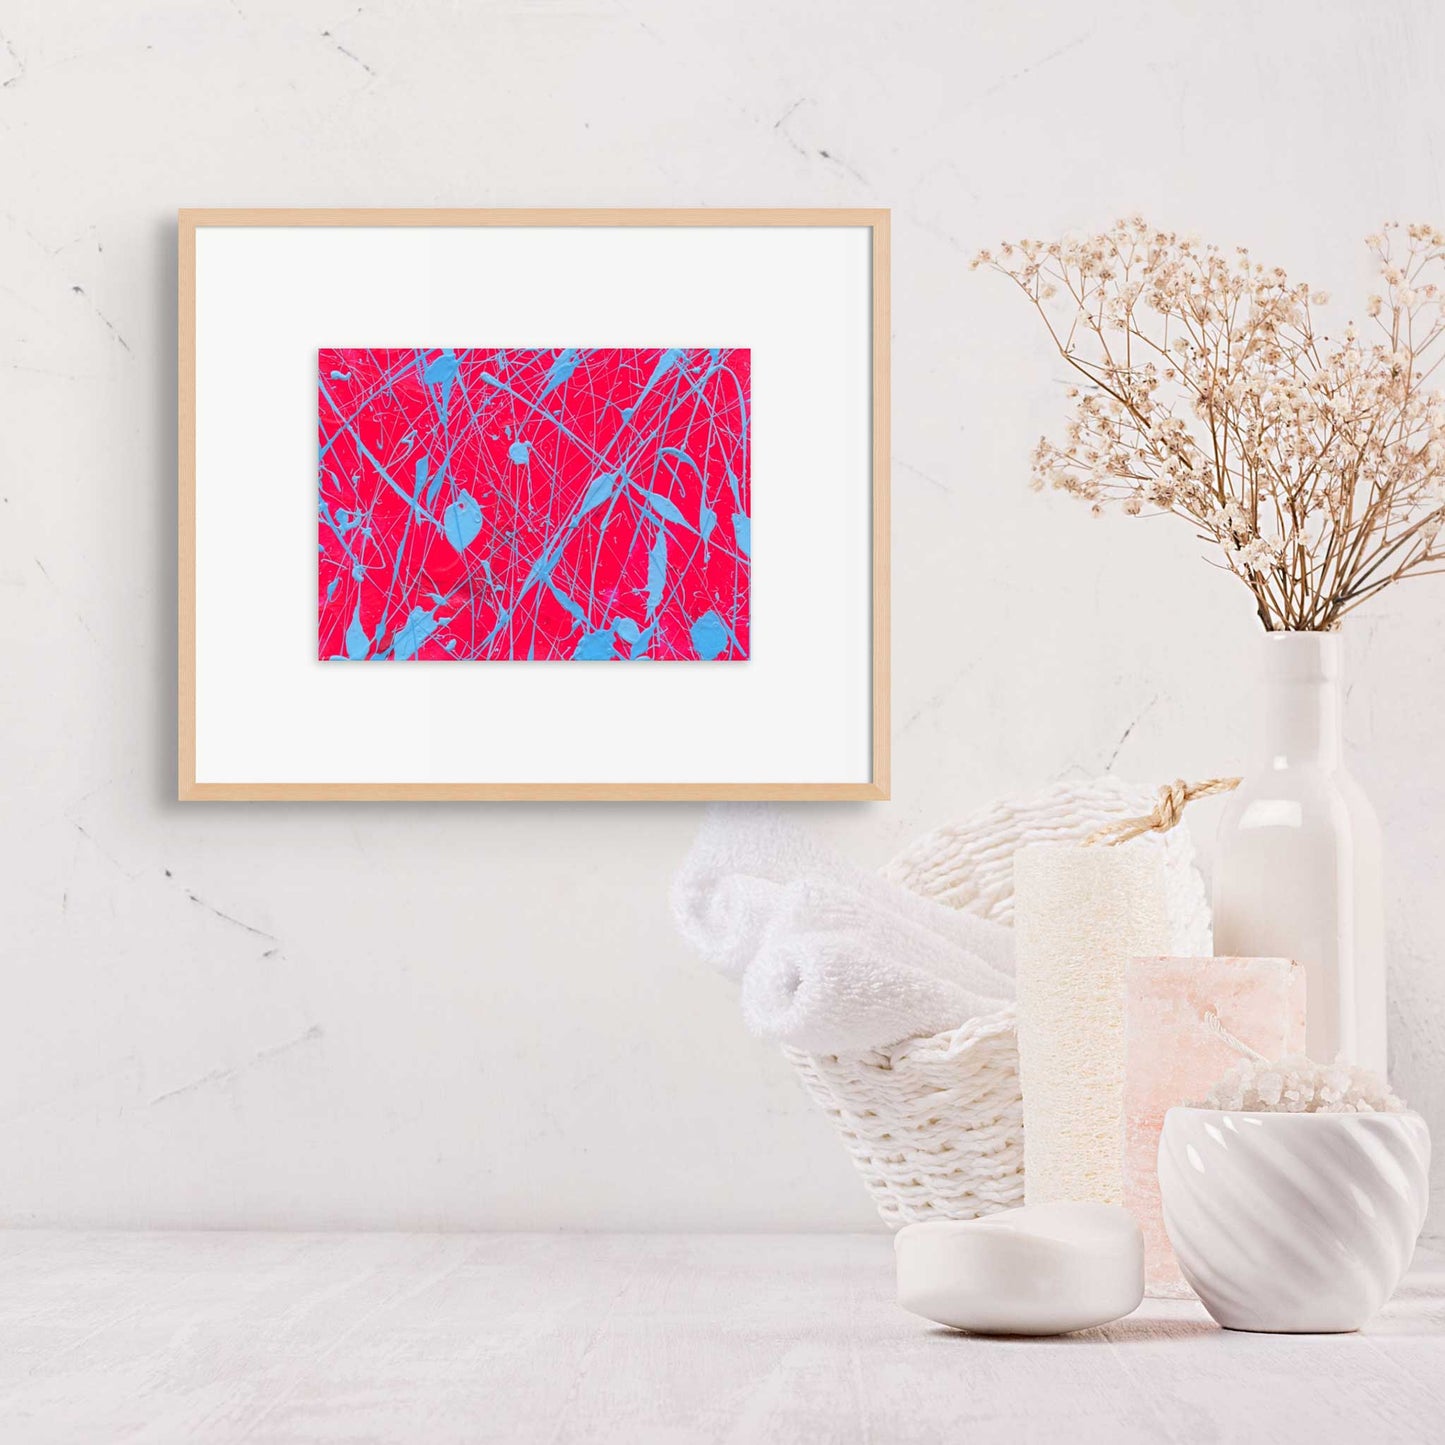 Clear Emotions, original abstract painting in bright pinks and sky blues by Bridget Bradley. Artwork seen framed in oak in situ in spa setting.